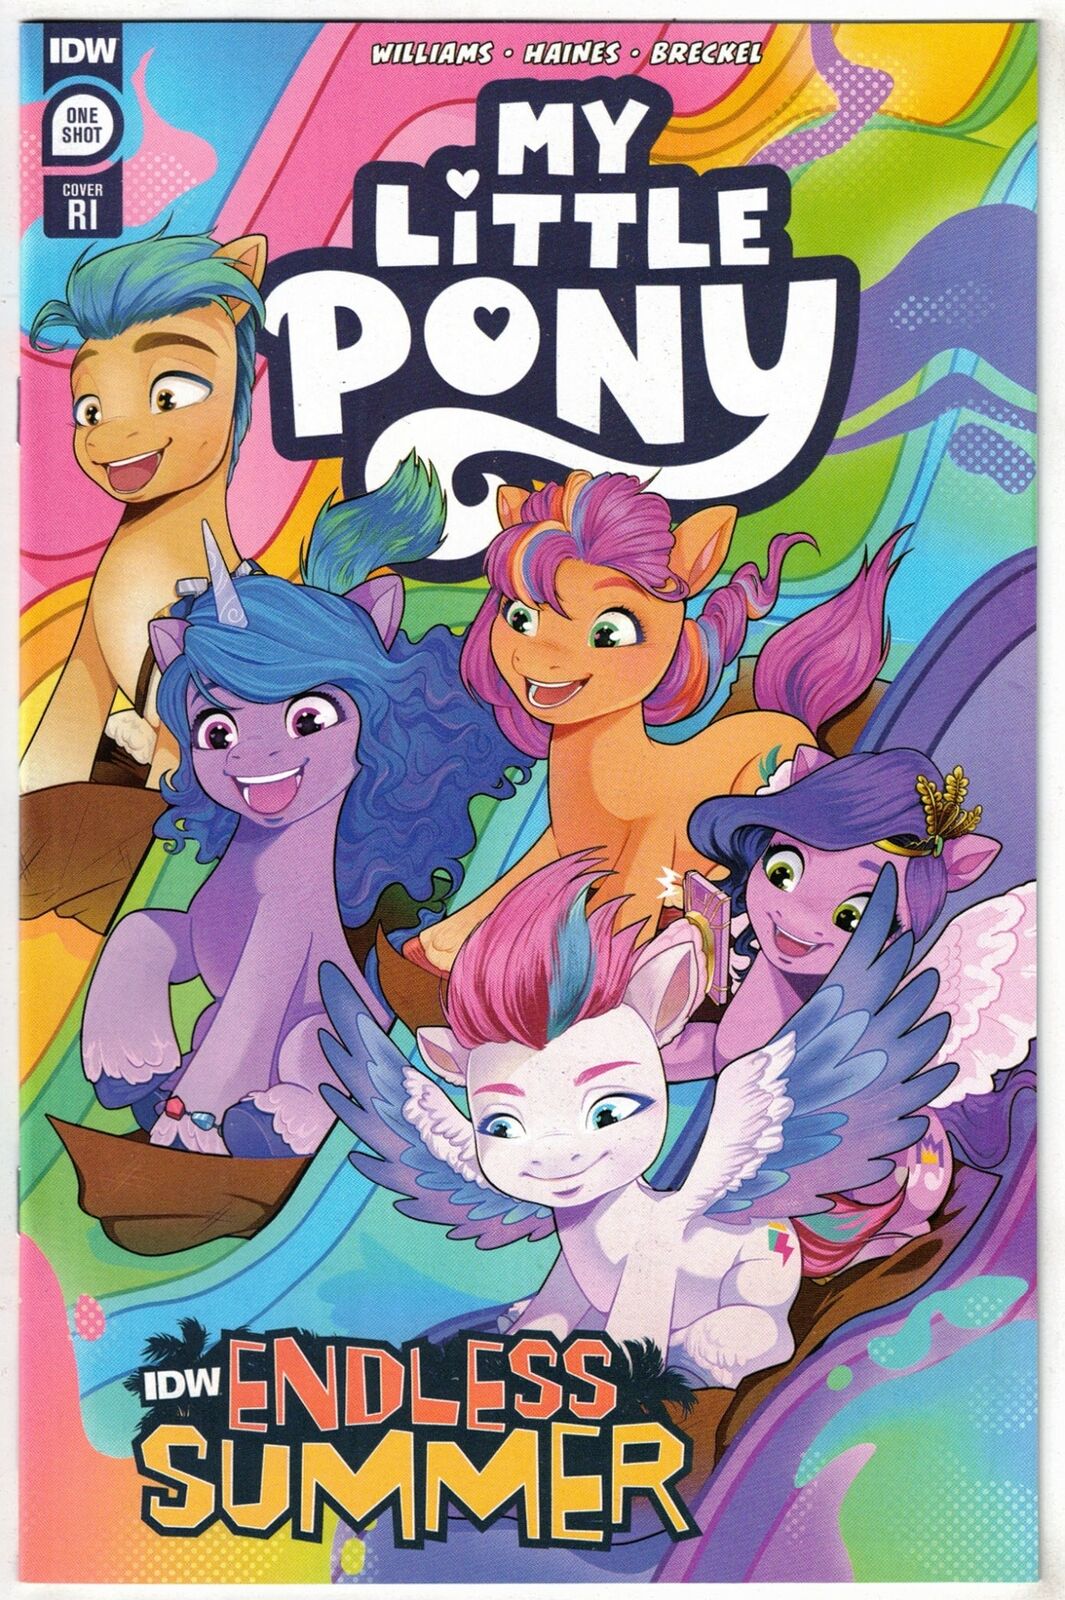 MY LITTLE PONY IDW ENDLESS SUMMER #1- 1:25 LUCYANNIS CAMACHO VARIANT- IDW